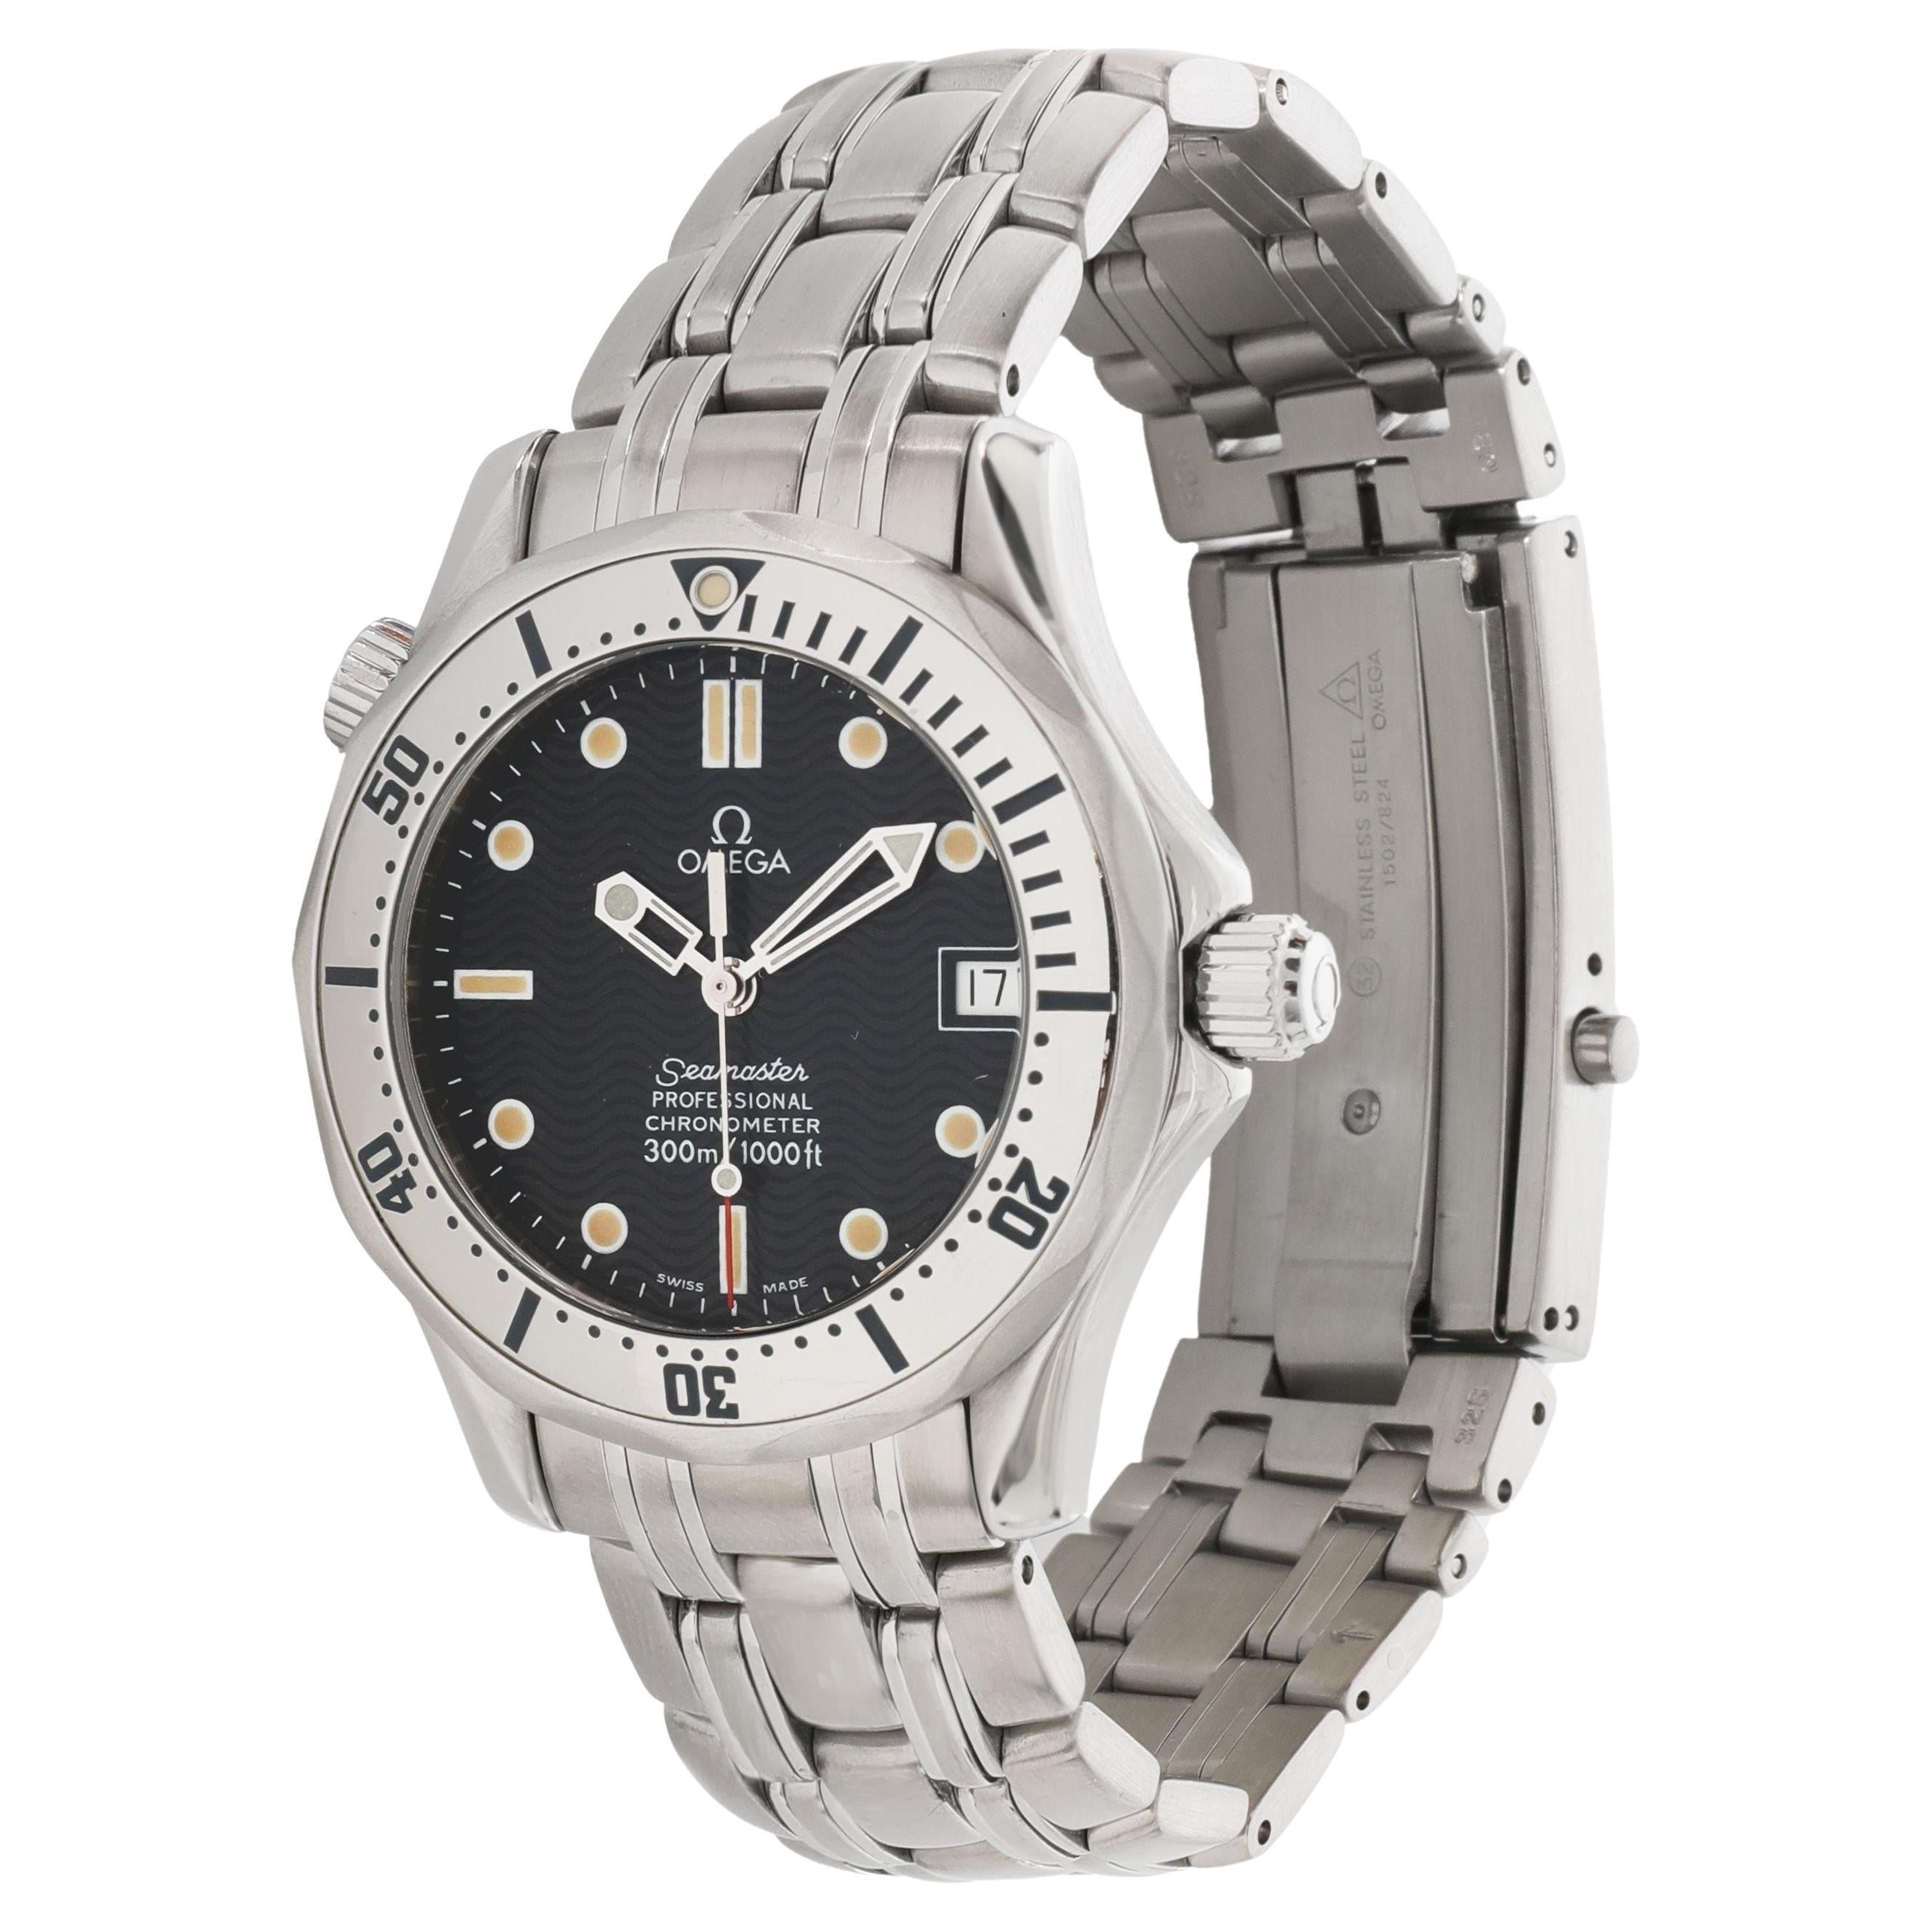 Omega Seamaster 2552.80 Unisex Watch in  Stainless Steel